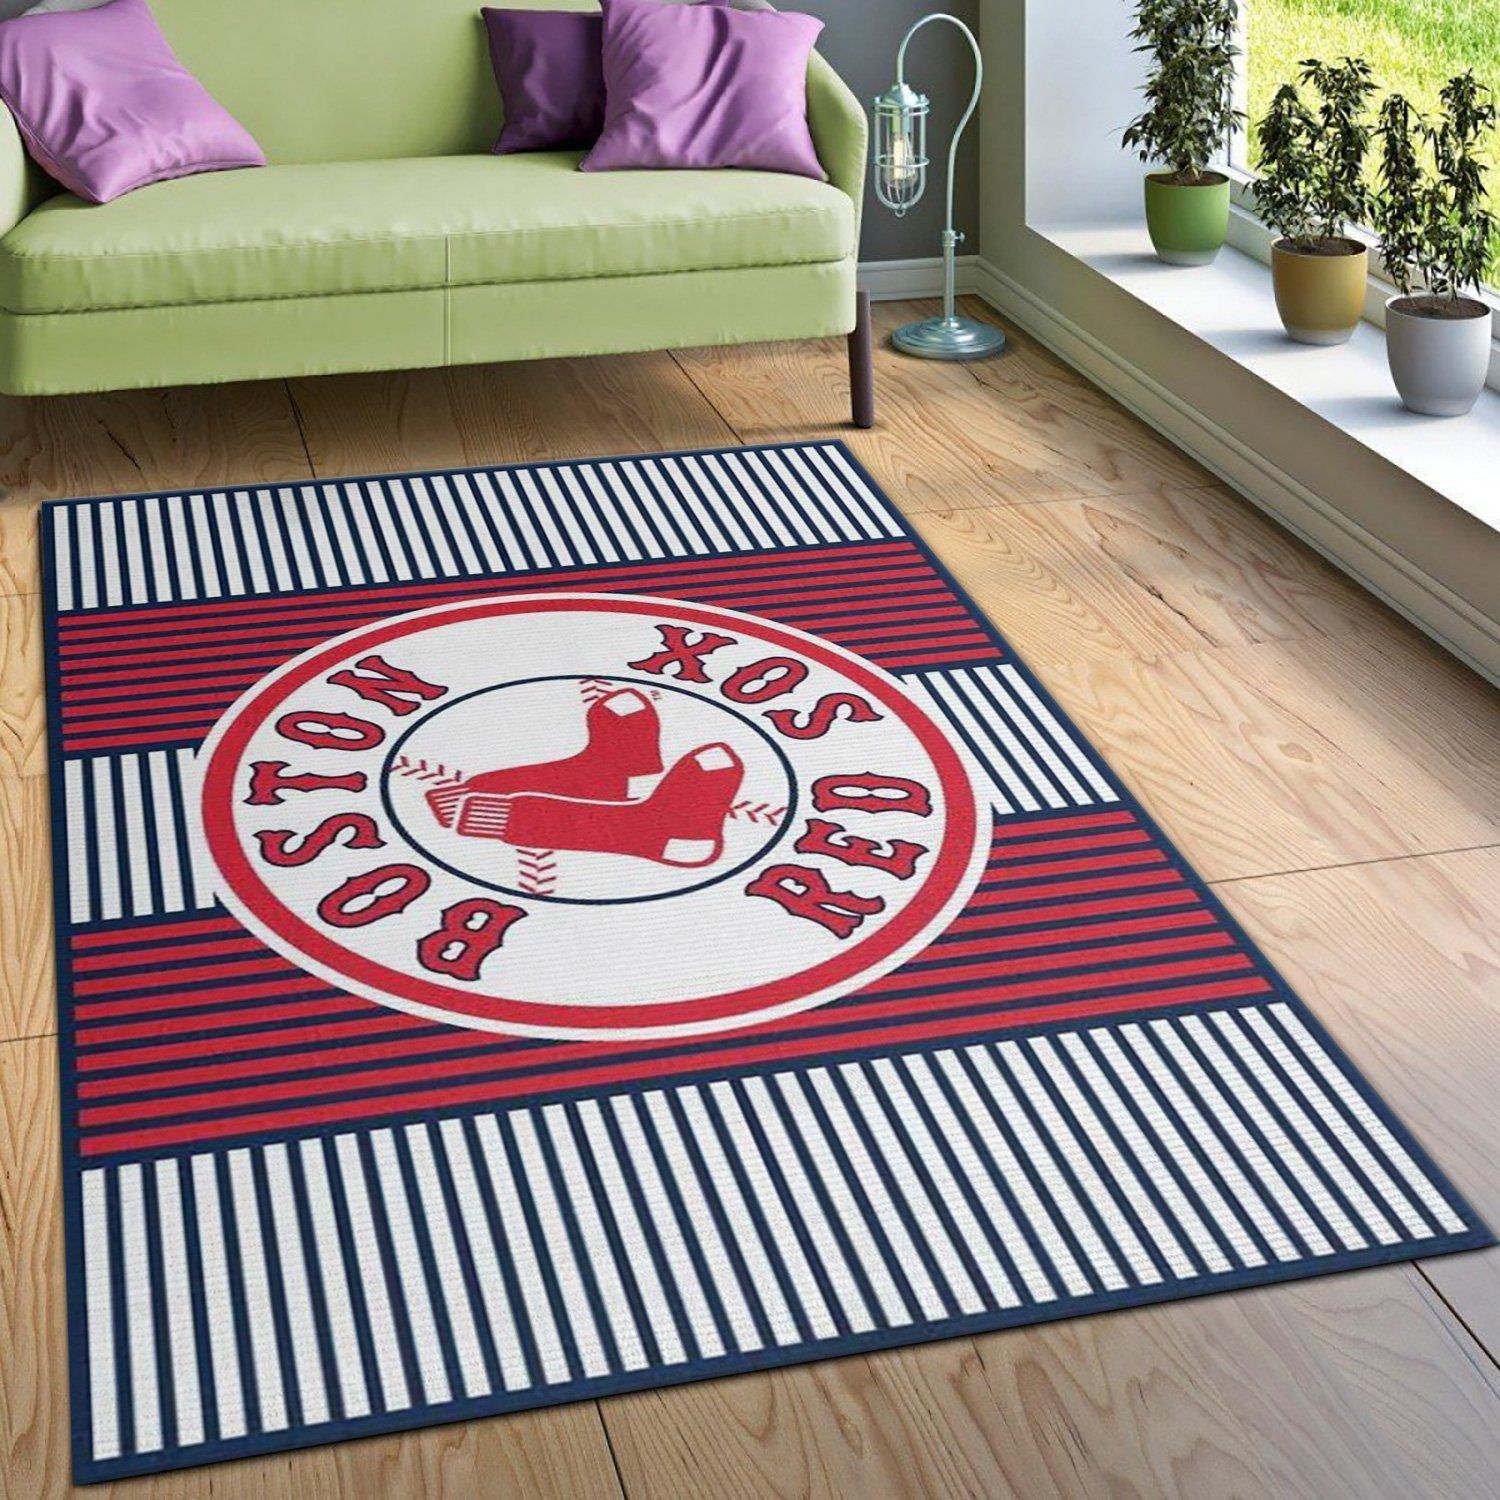 Boston Red Sox Imperial Champion Rug Area Rug For Christmas, Living room and bedroom Rug, Family Gift US Decor - Indoor Outdoor Rugs 2